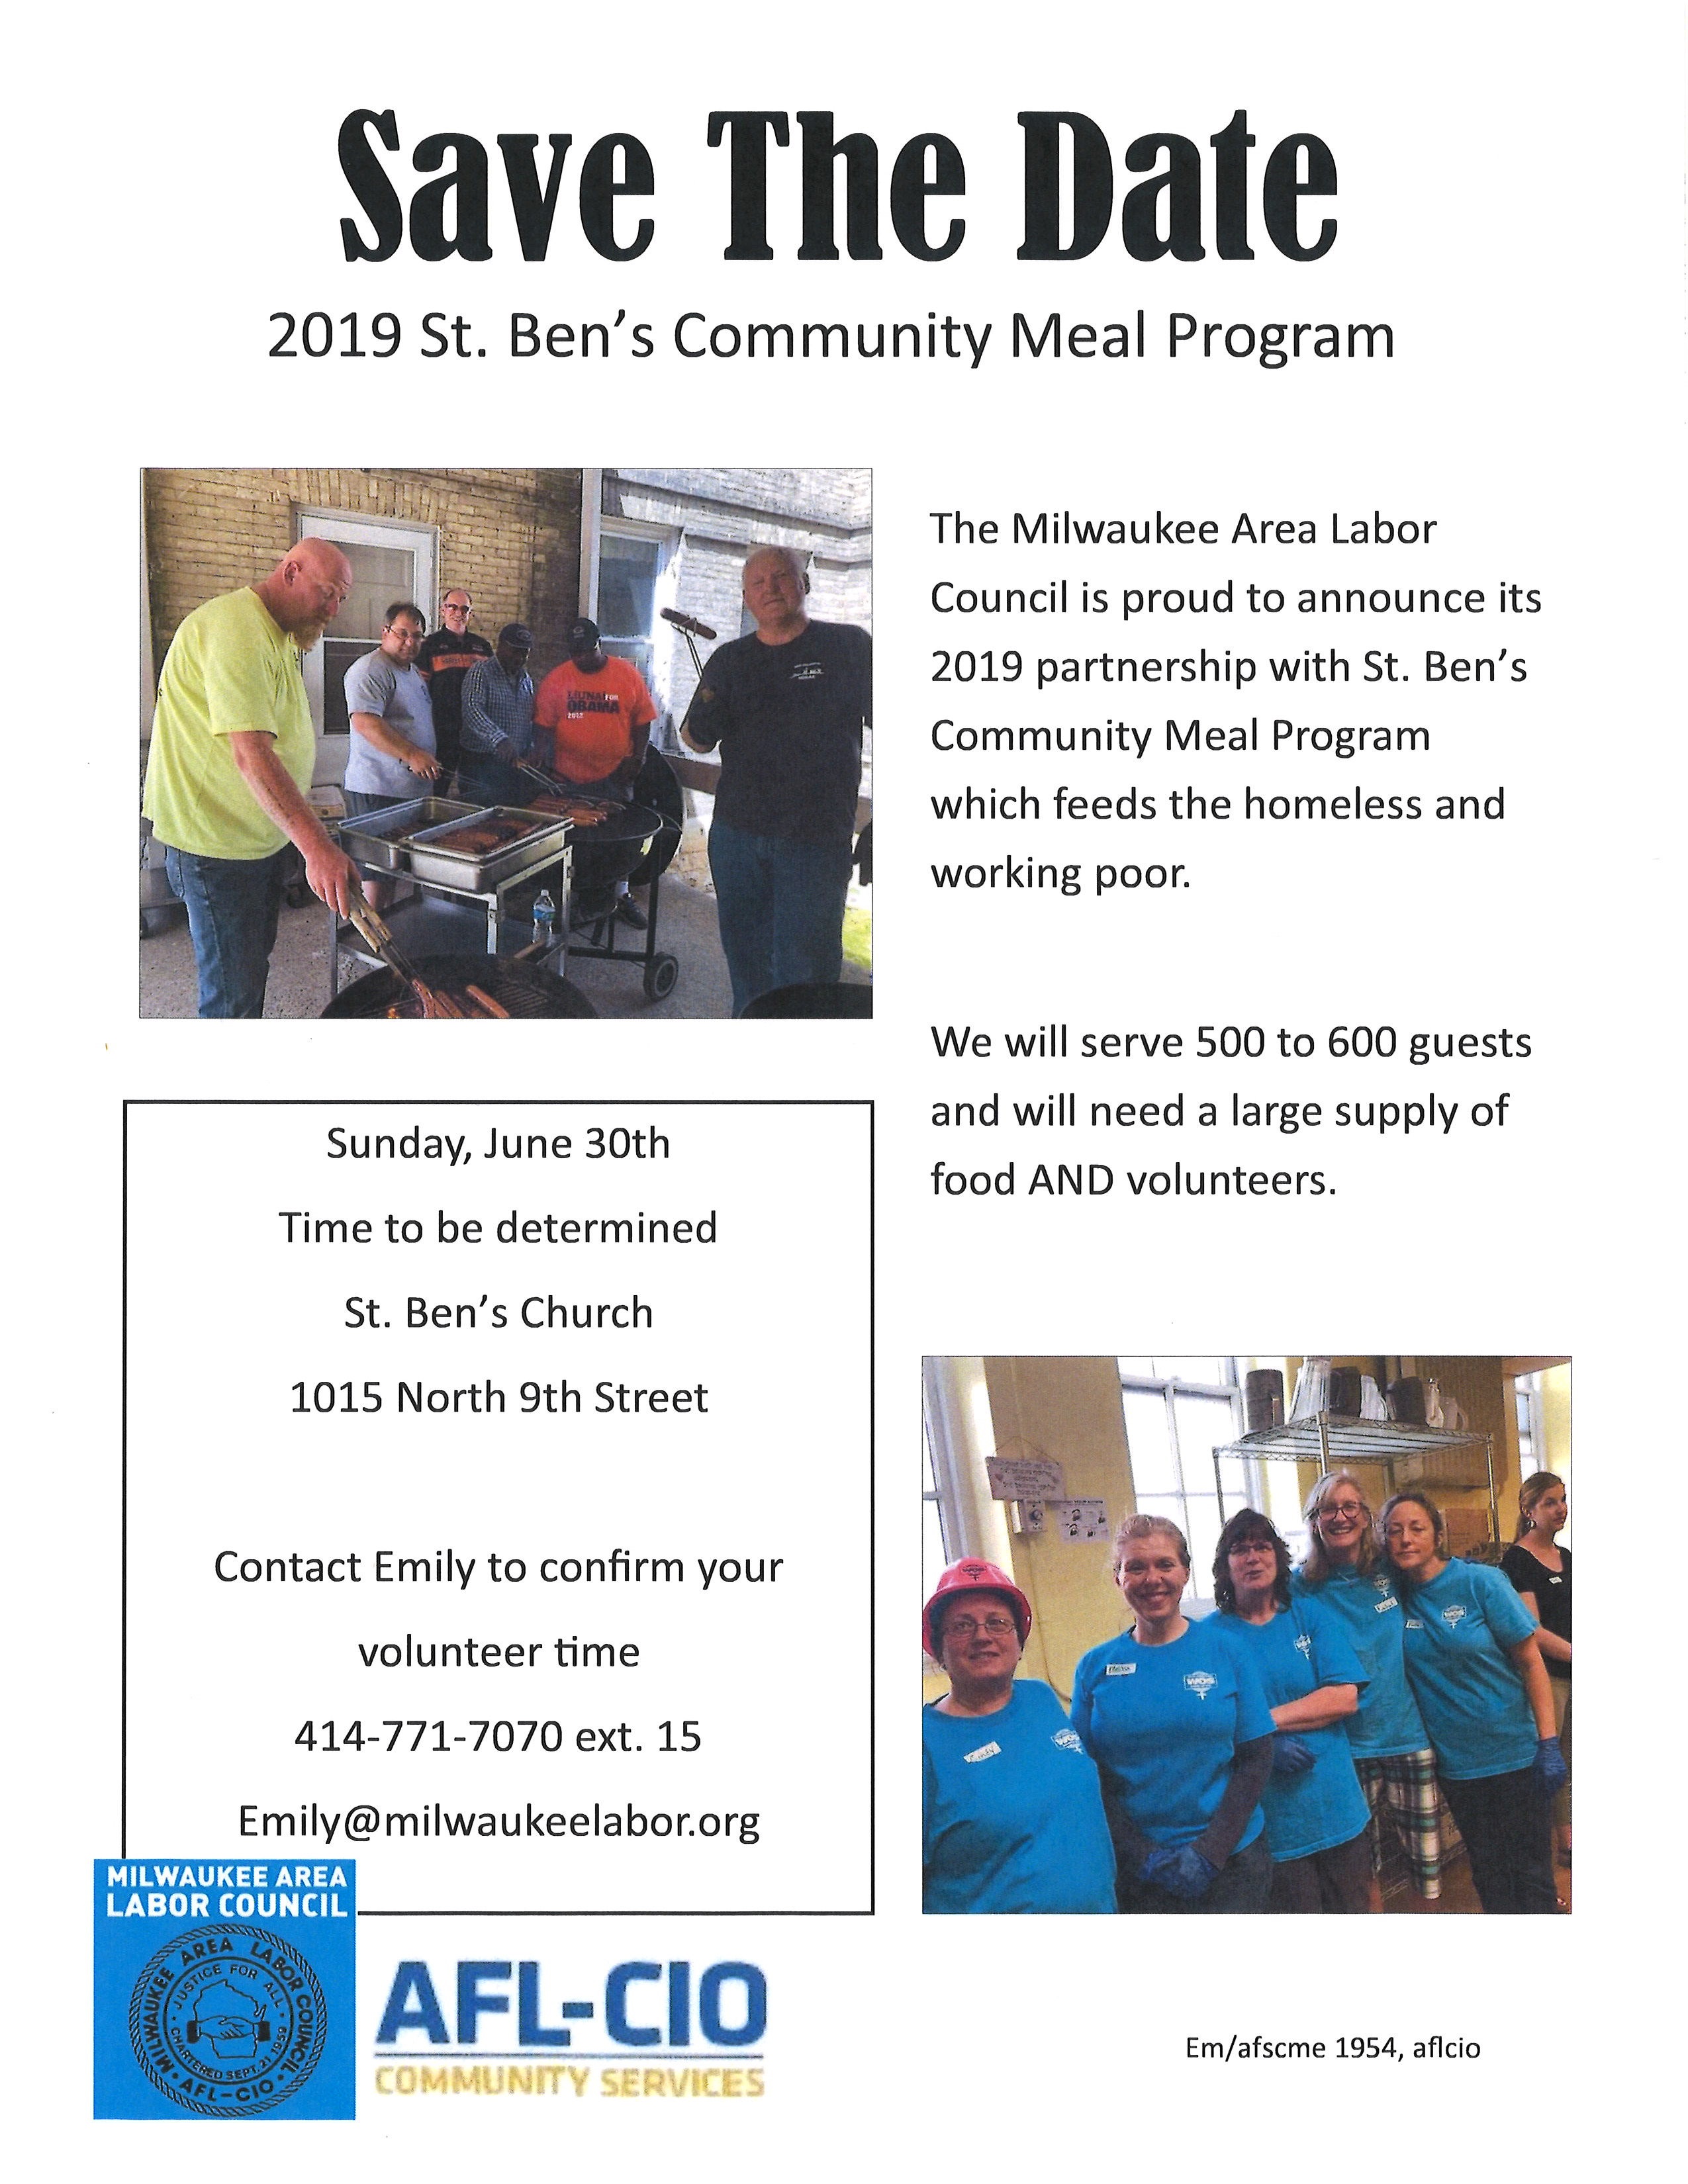 Save the Date: 2019 St. Ben’s Meal Program